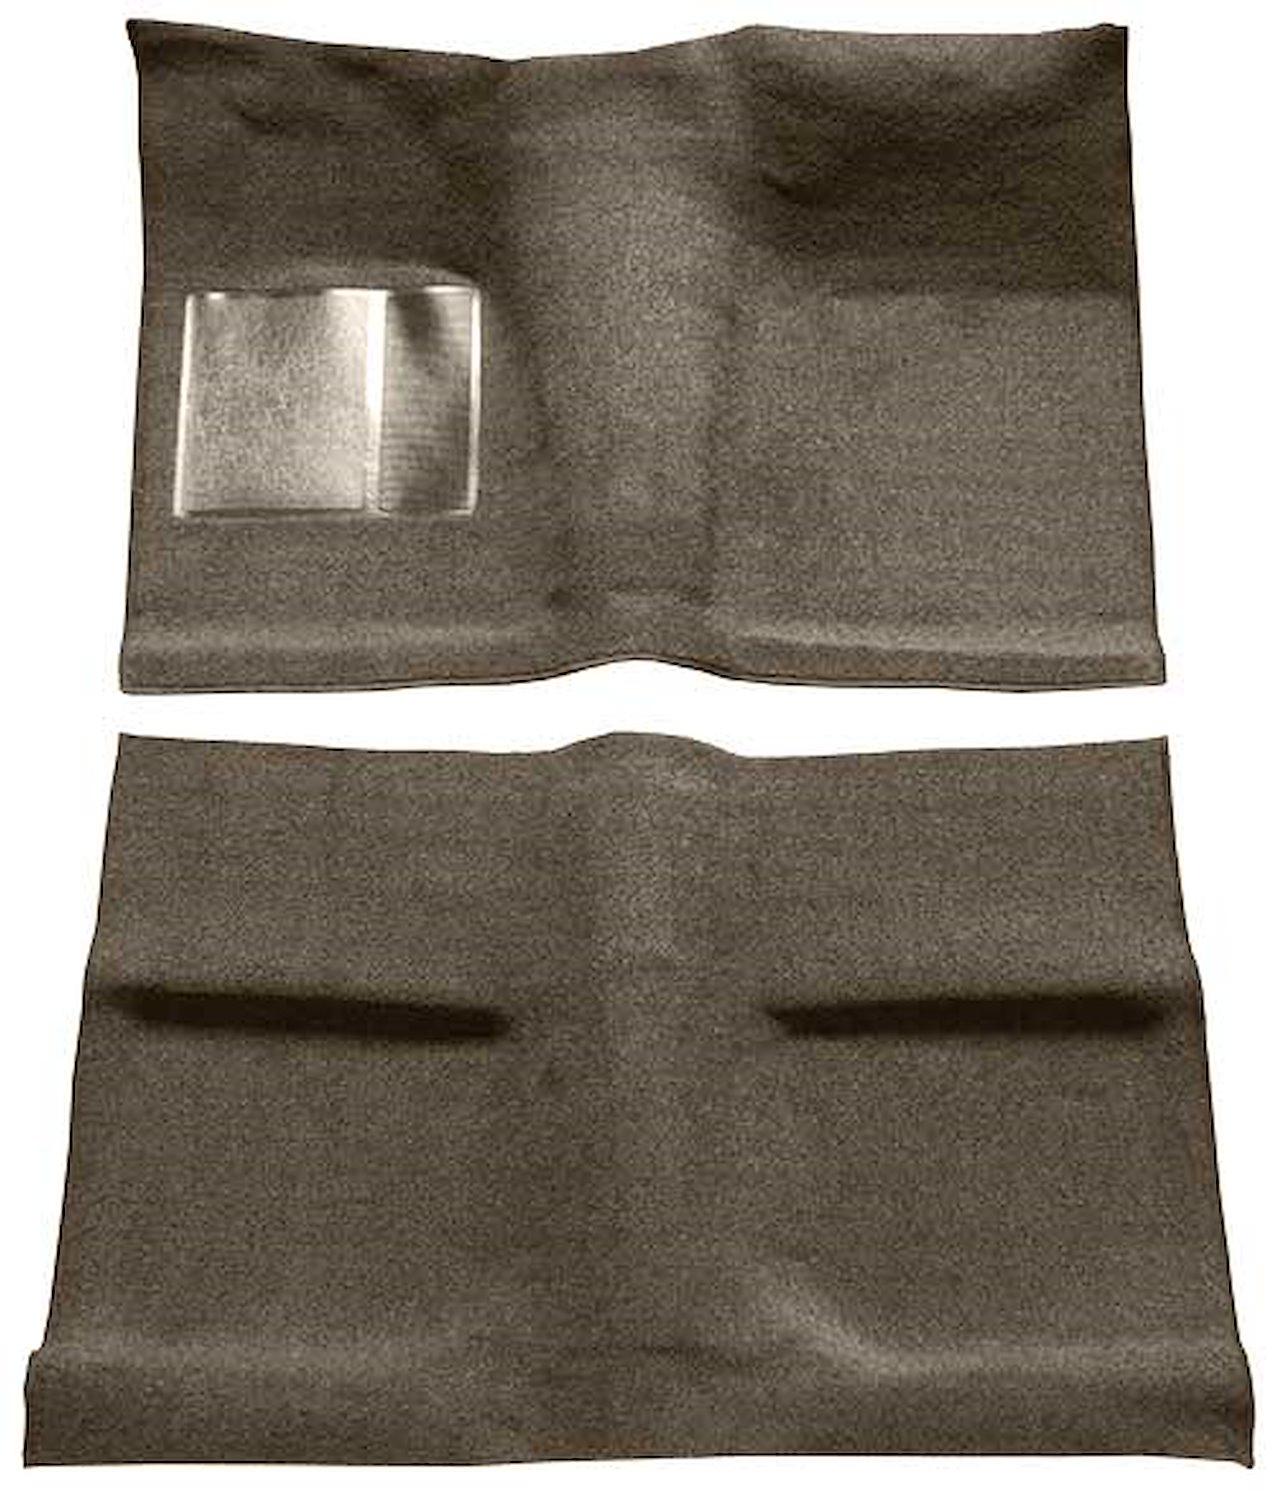 A4030B07 Passenger Area Loop Floor Carpet Set With Mass Backing 1964 Mustang Coupe; Parchment